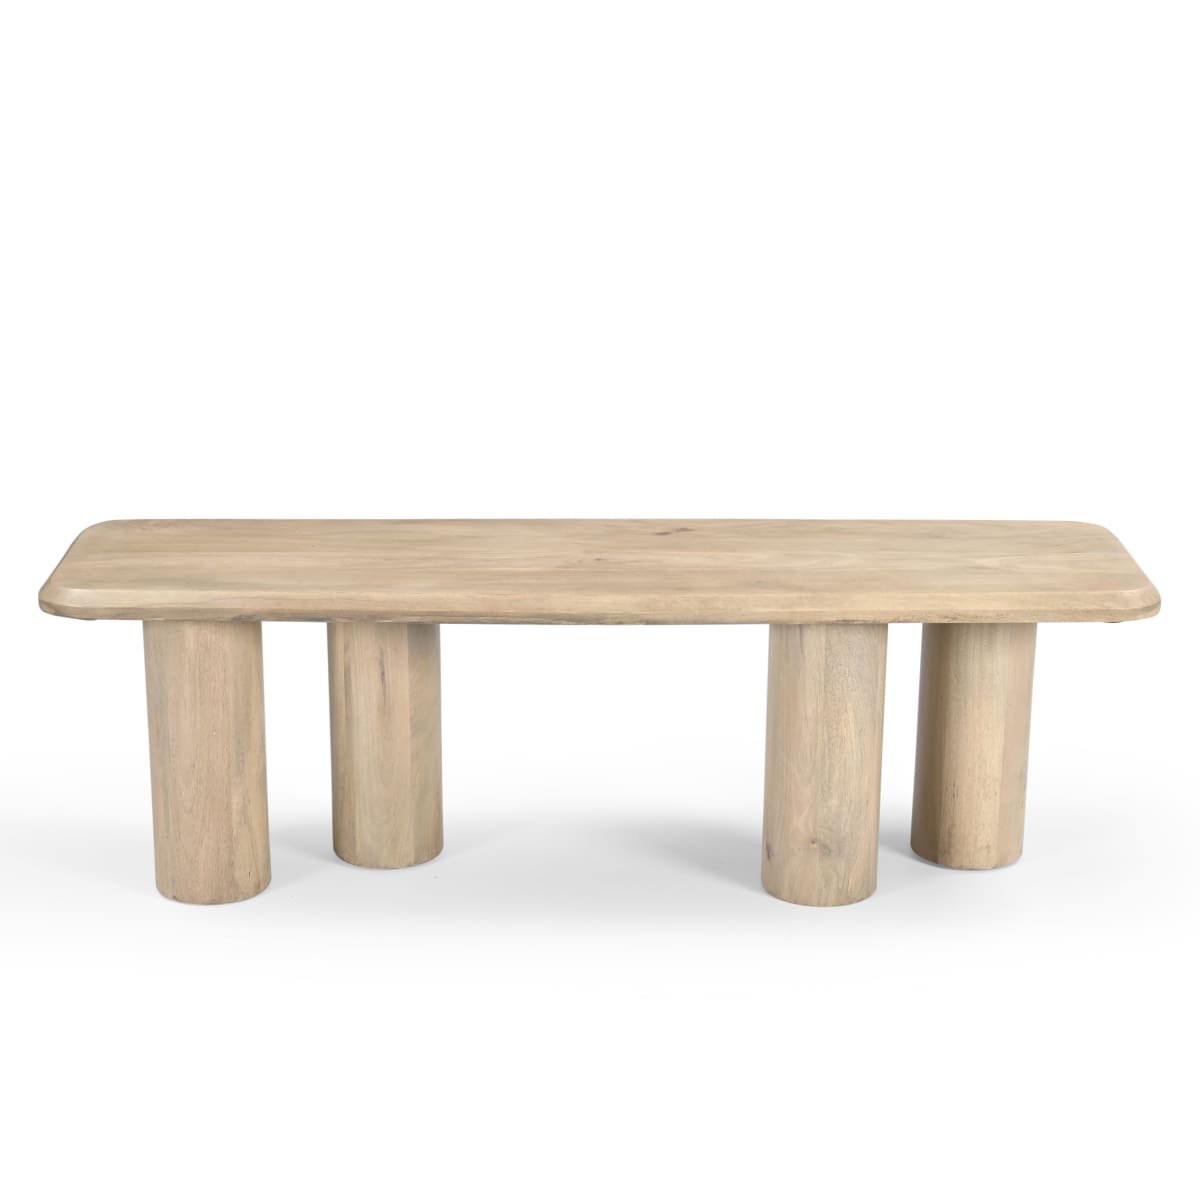 Lotus Mango Wood Dining Table - 70.87W X 35.43D X 30H. - dining-table